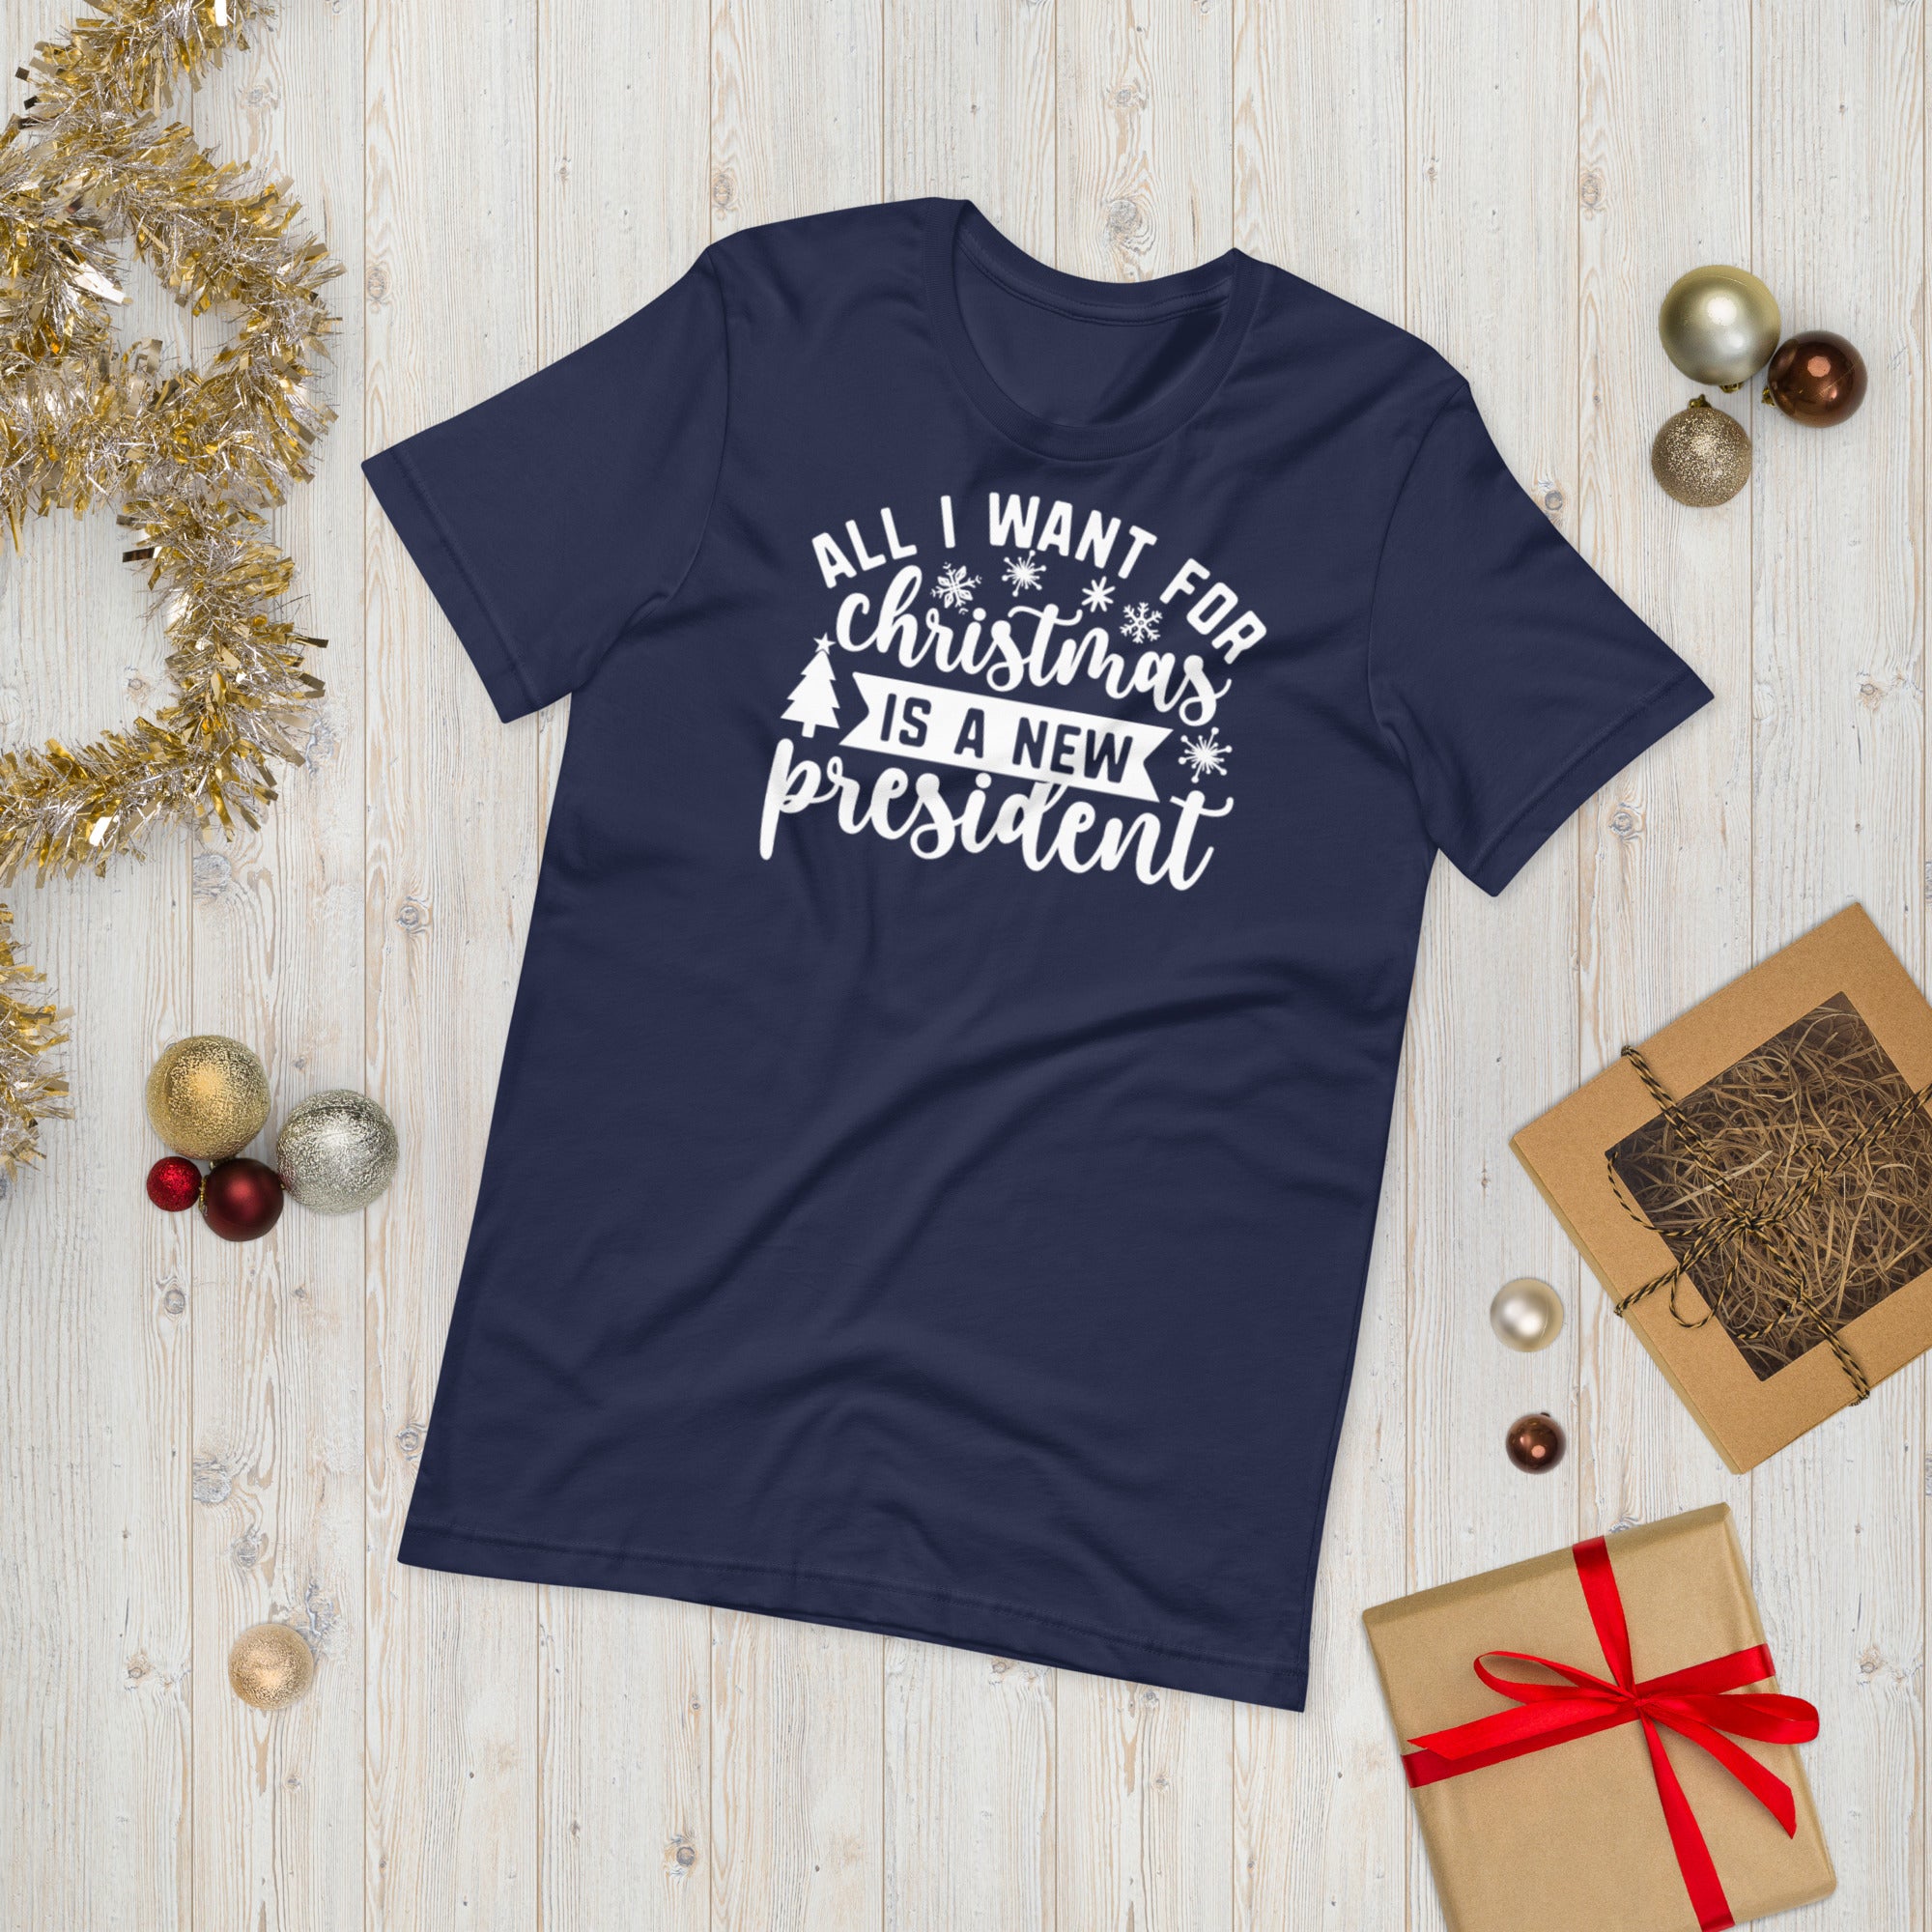 All I Want For Christmas Is A New President Shirt, FJB Christmas Shirt, Christmas Gifts, Anti Biden Gift, Christmas Pajamas, FJB Xmas Shirt - Madeinsea©